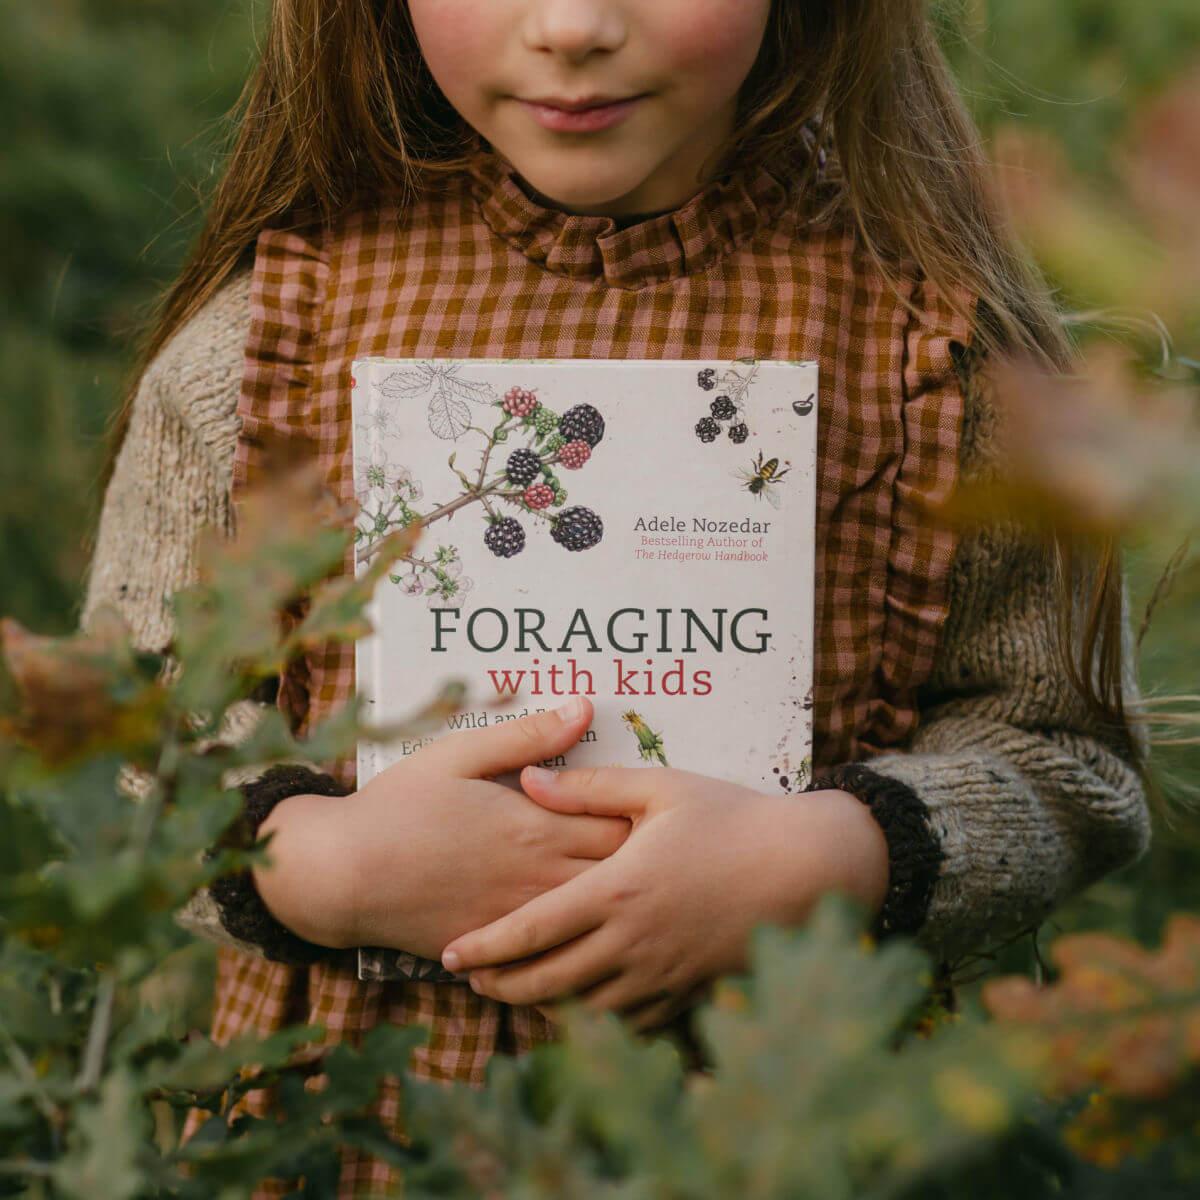 Foraging with kids book 52 wild and free edibles to enjoy with your children by Adele Nozedar